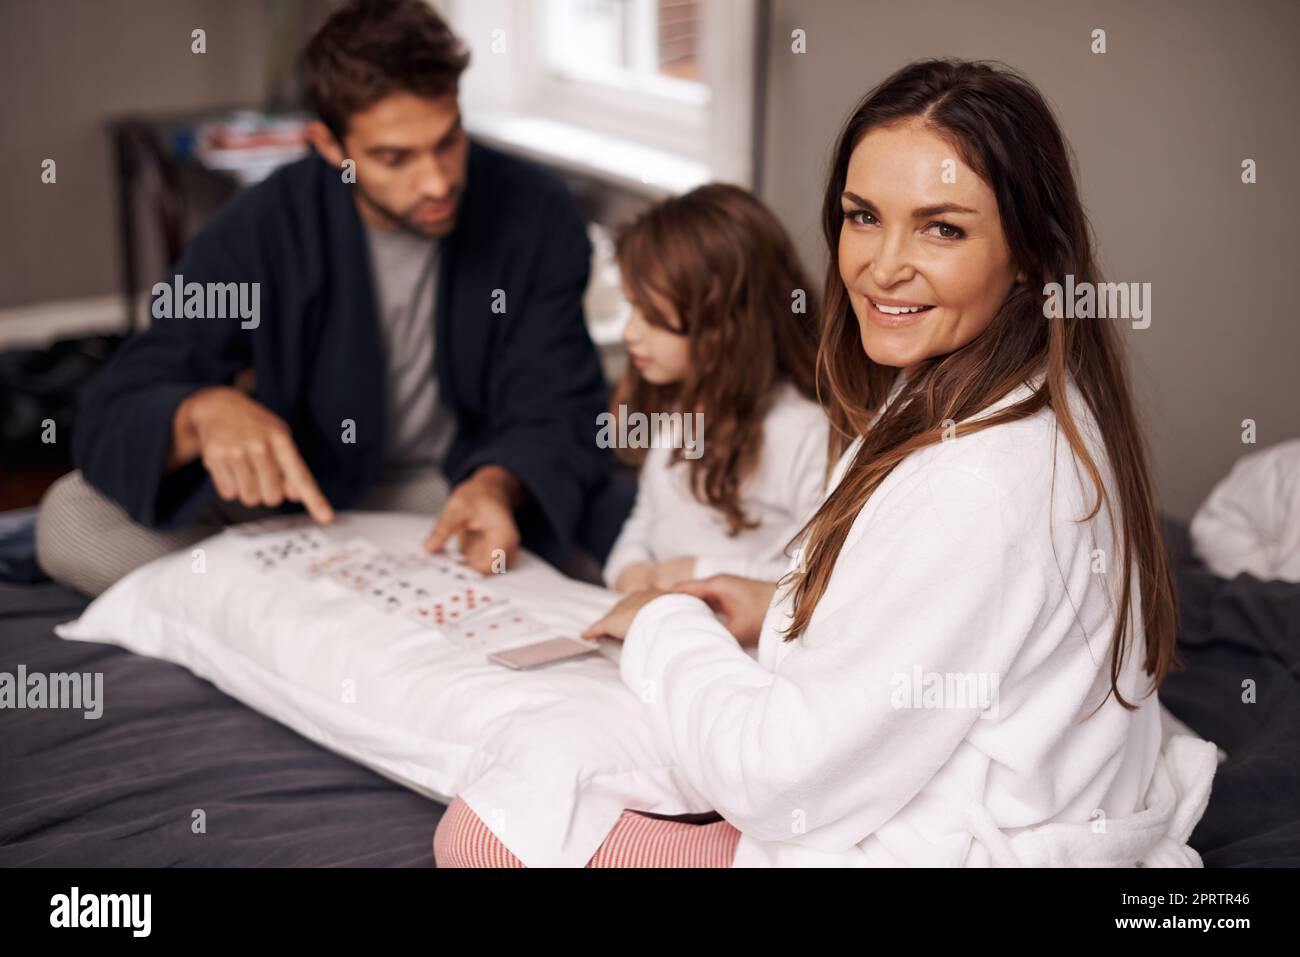 They love their card games. a young family playing cards together at home. Stock Photo